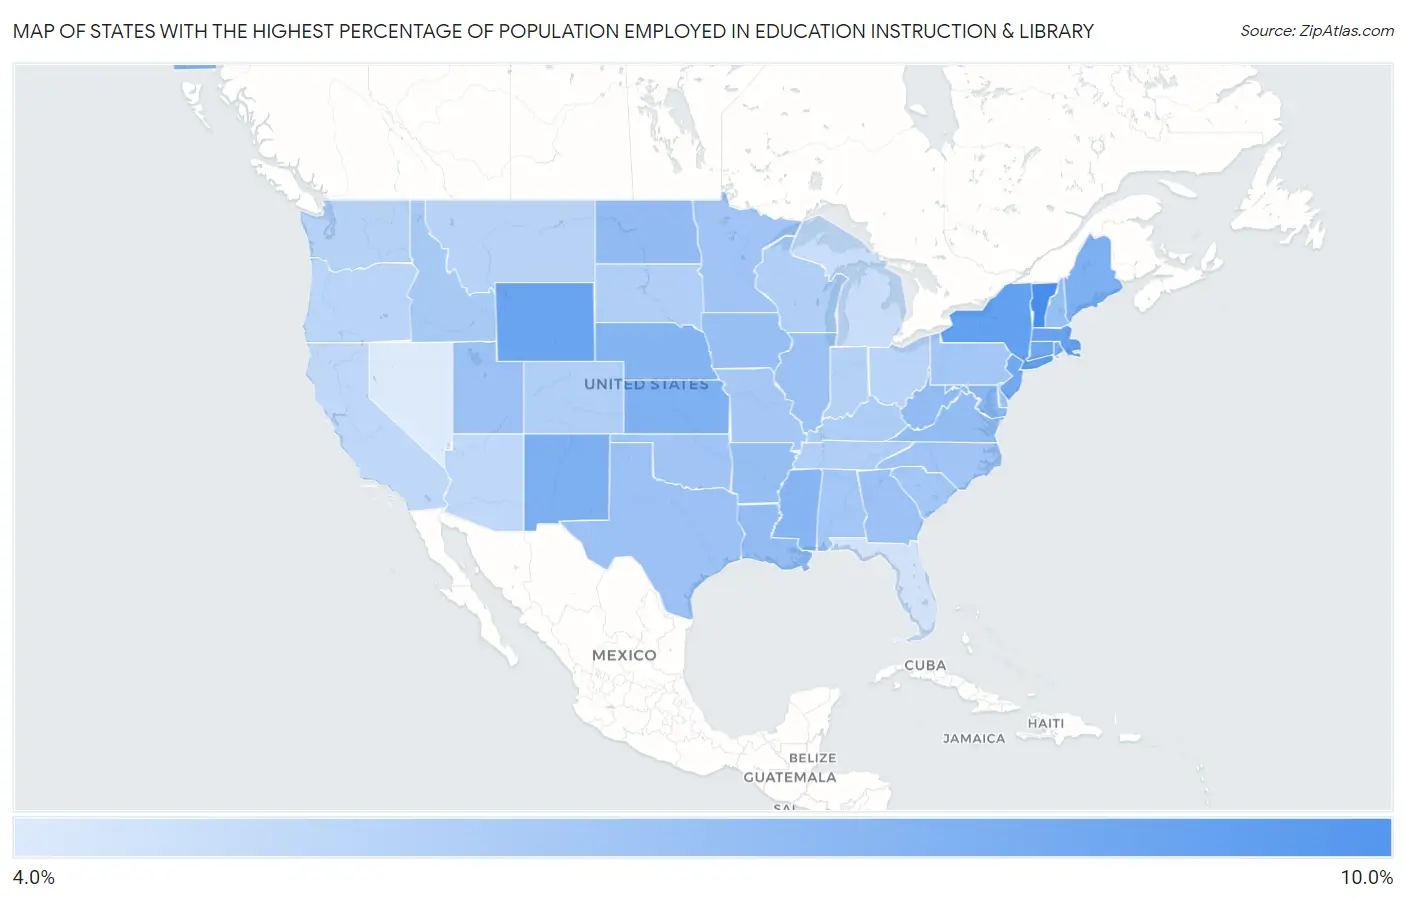 States with the Highest Percentage of Population Employed in Education Instruction & Library in the United States Map